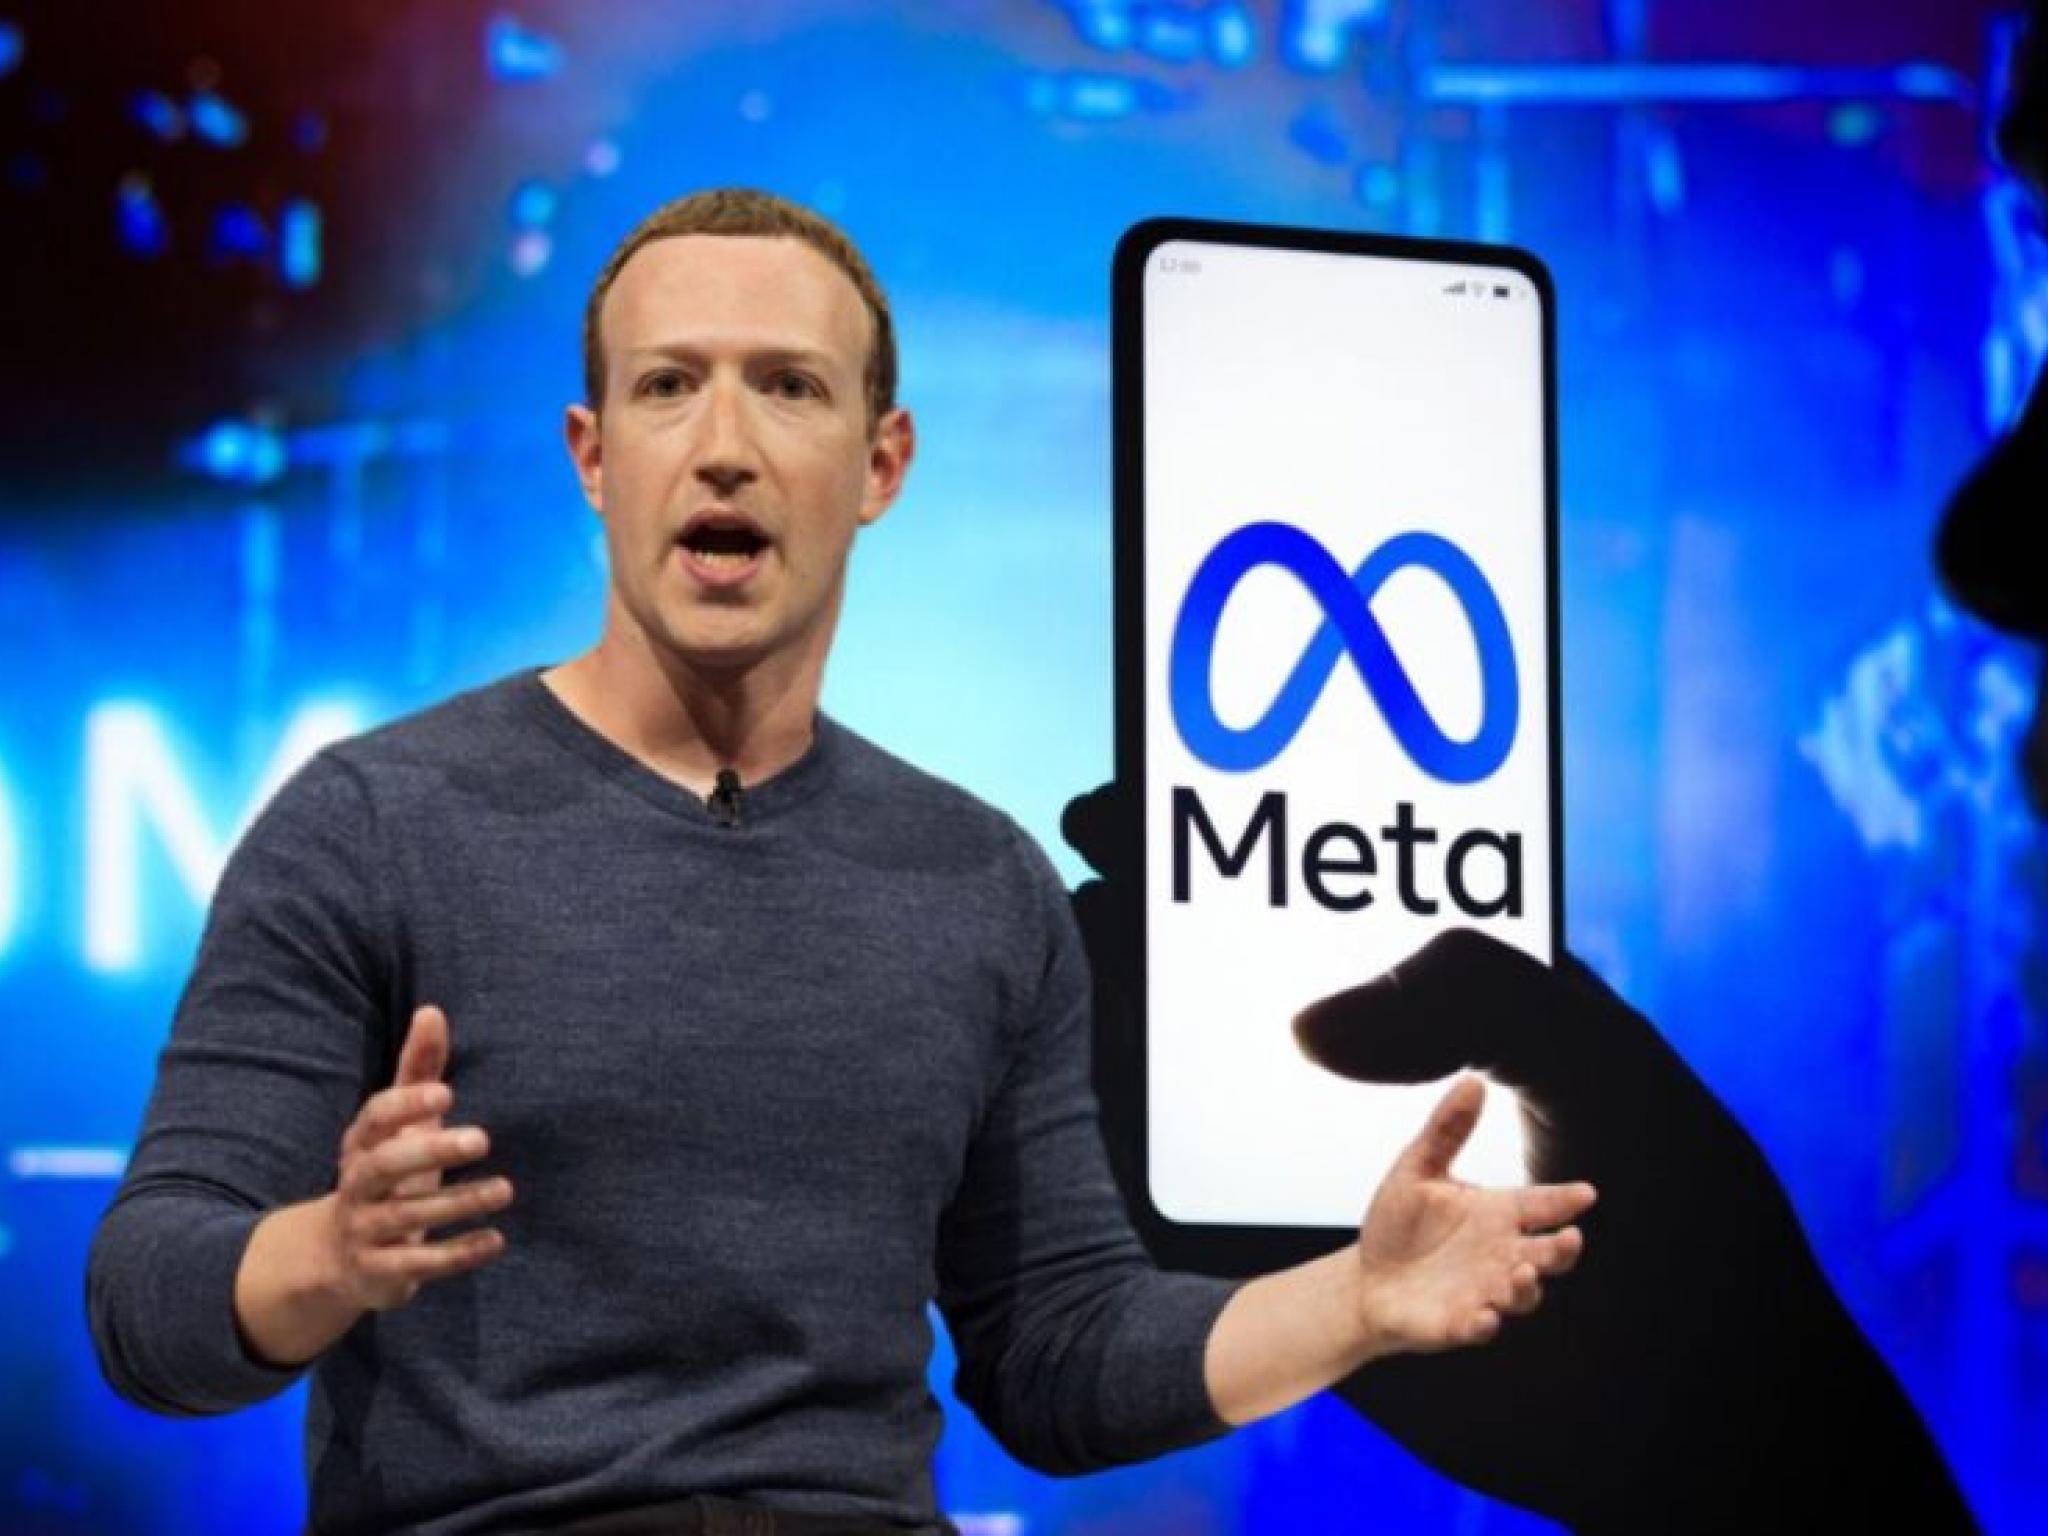  mark-zuckerbergs-meta-warns-it-may-block-news-content-in-australia-if-asked-to-pay-licensing-fees 